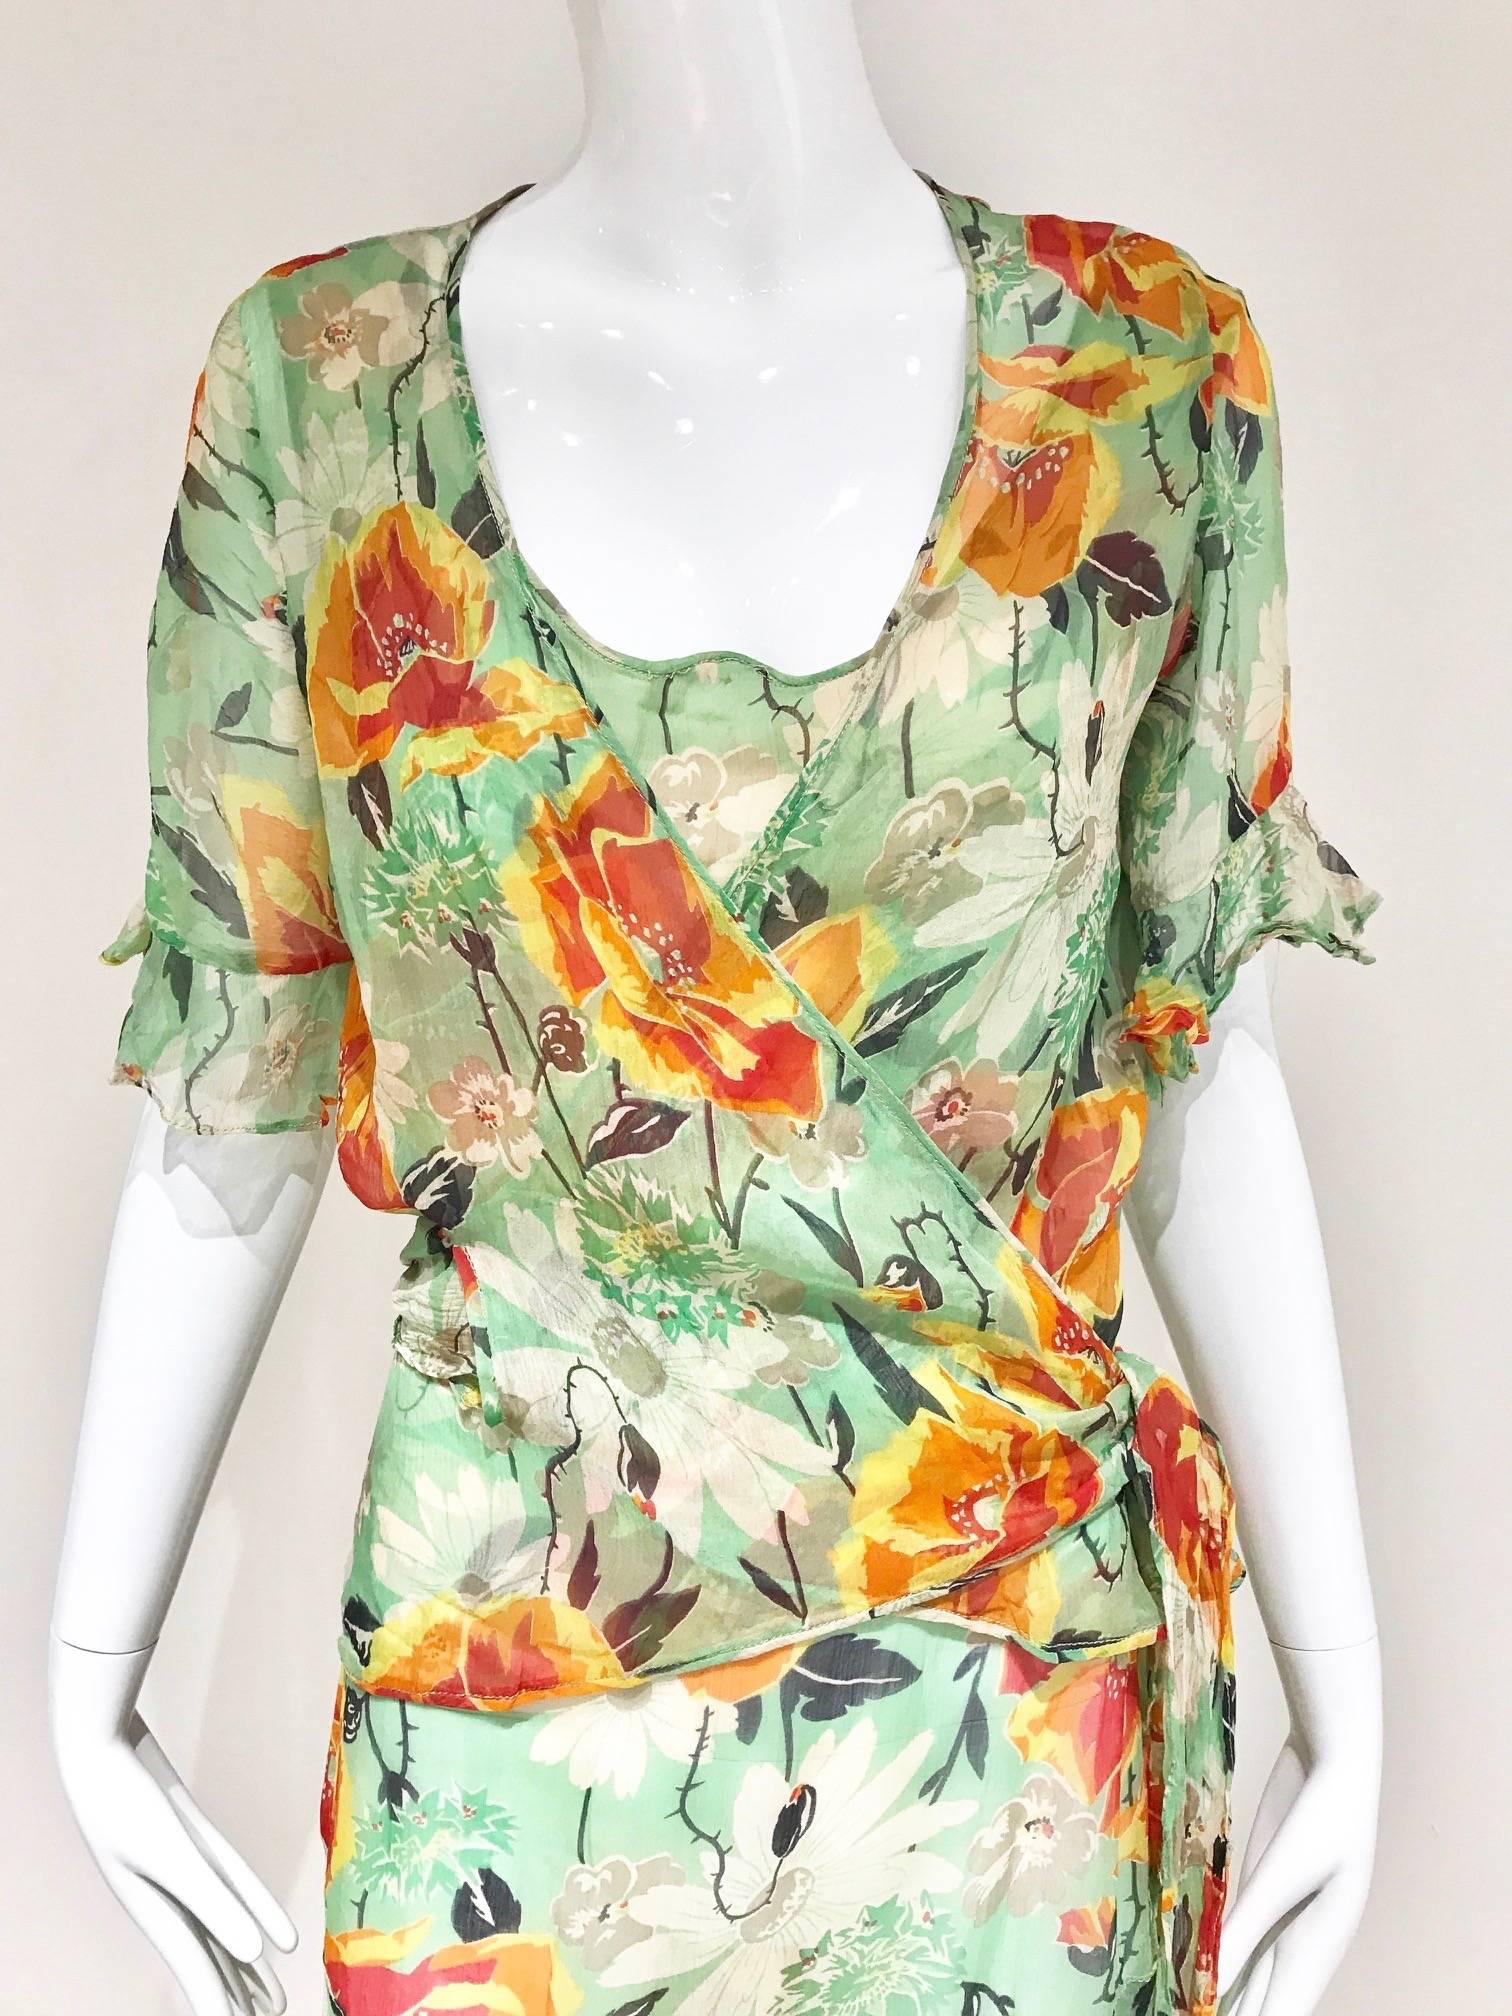 1930s Floral print silk dress with wrap jacket. Delicate pieces. Size 6
lining need to be replaced. 